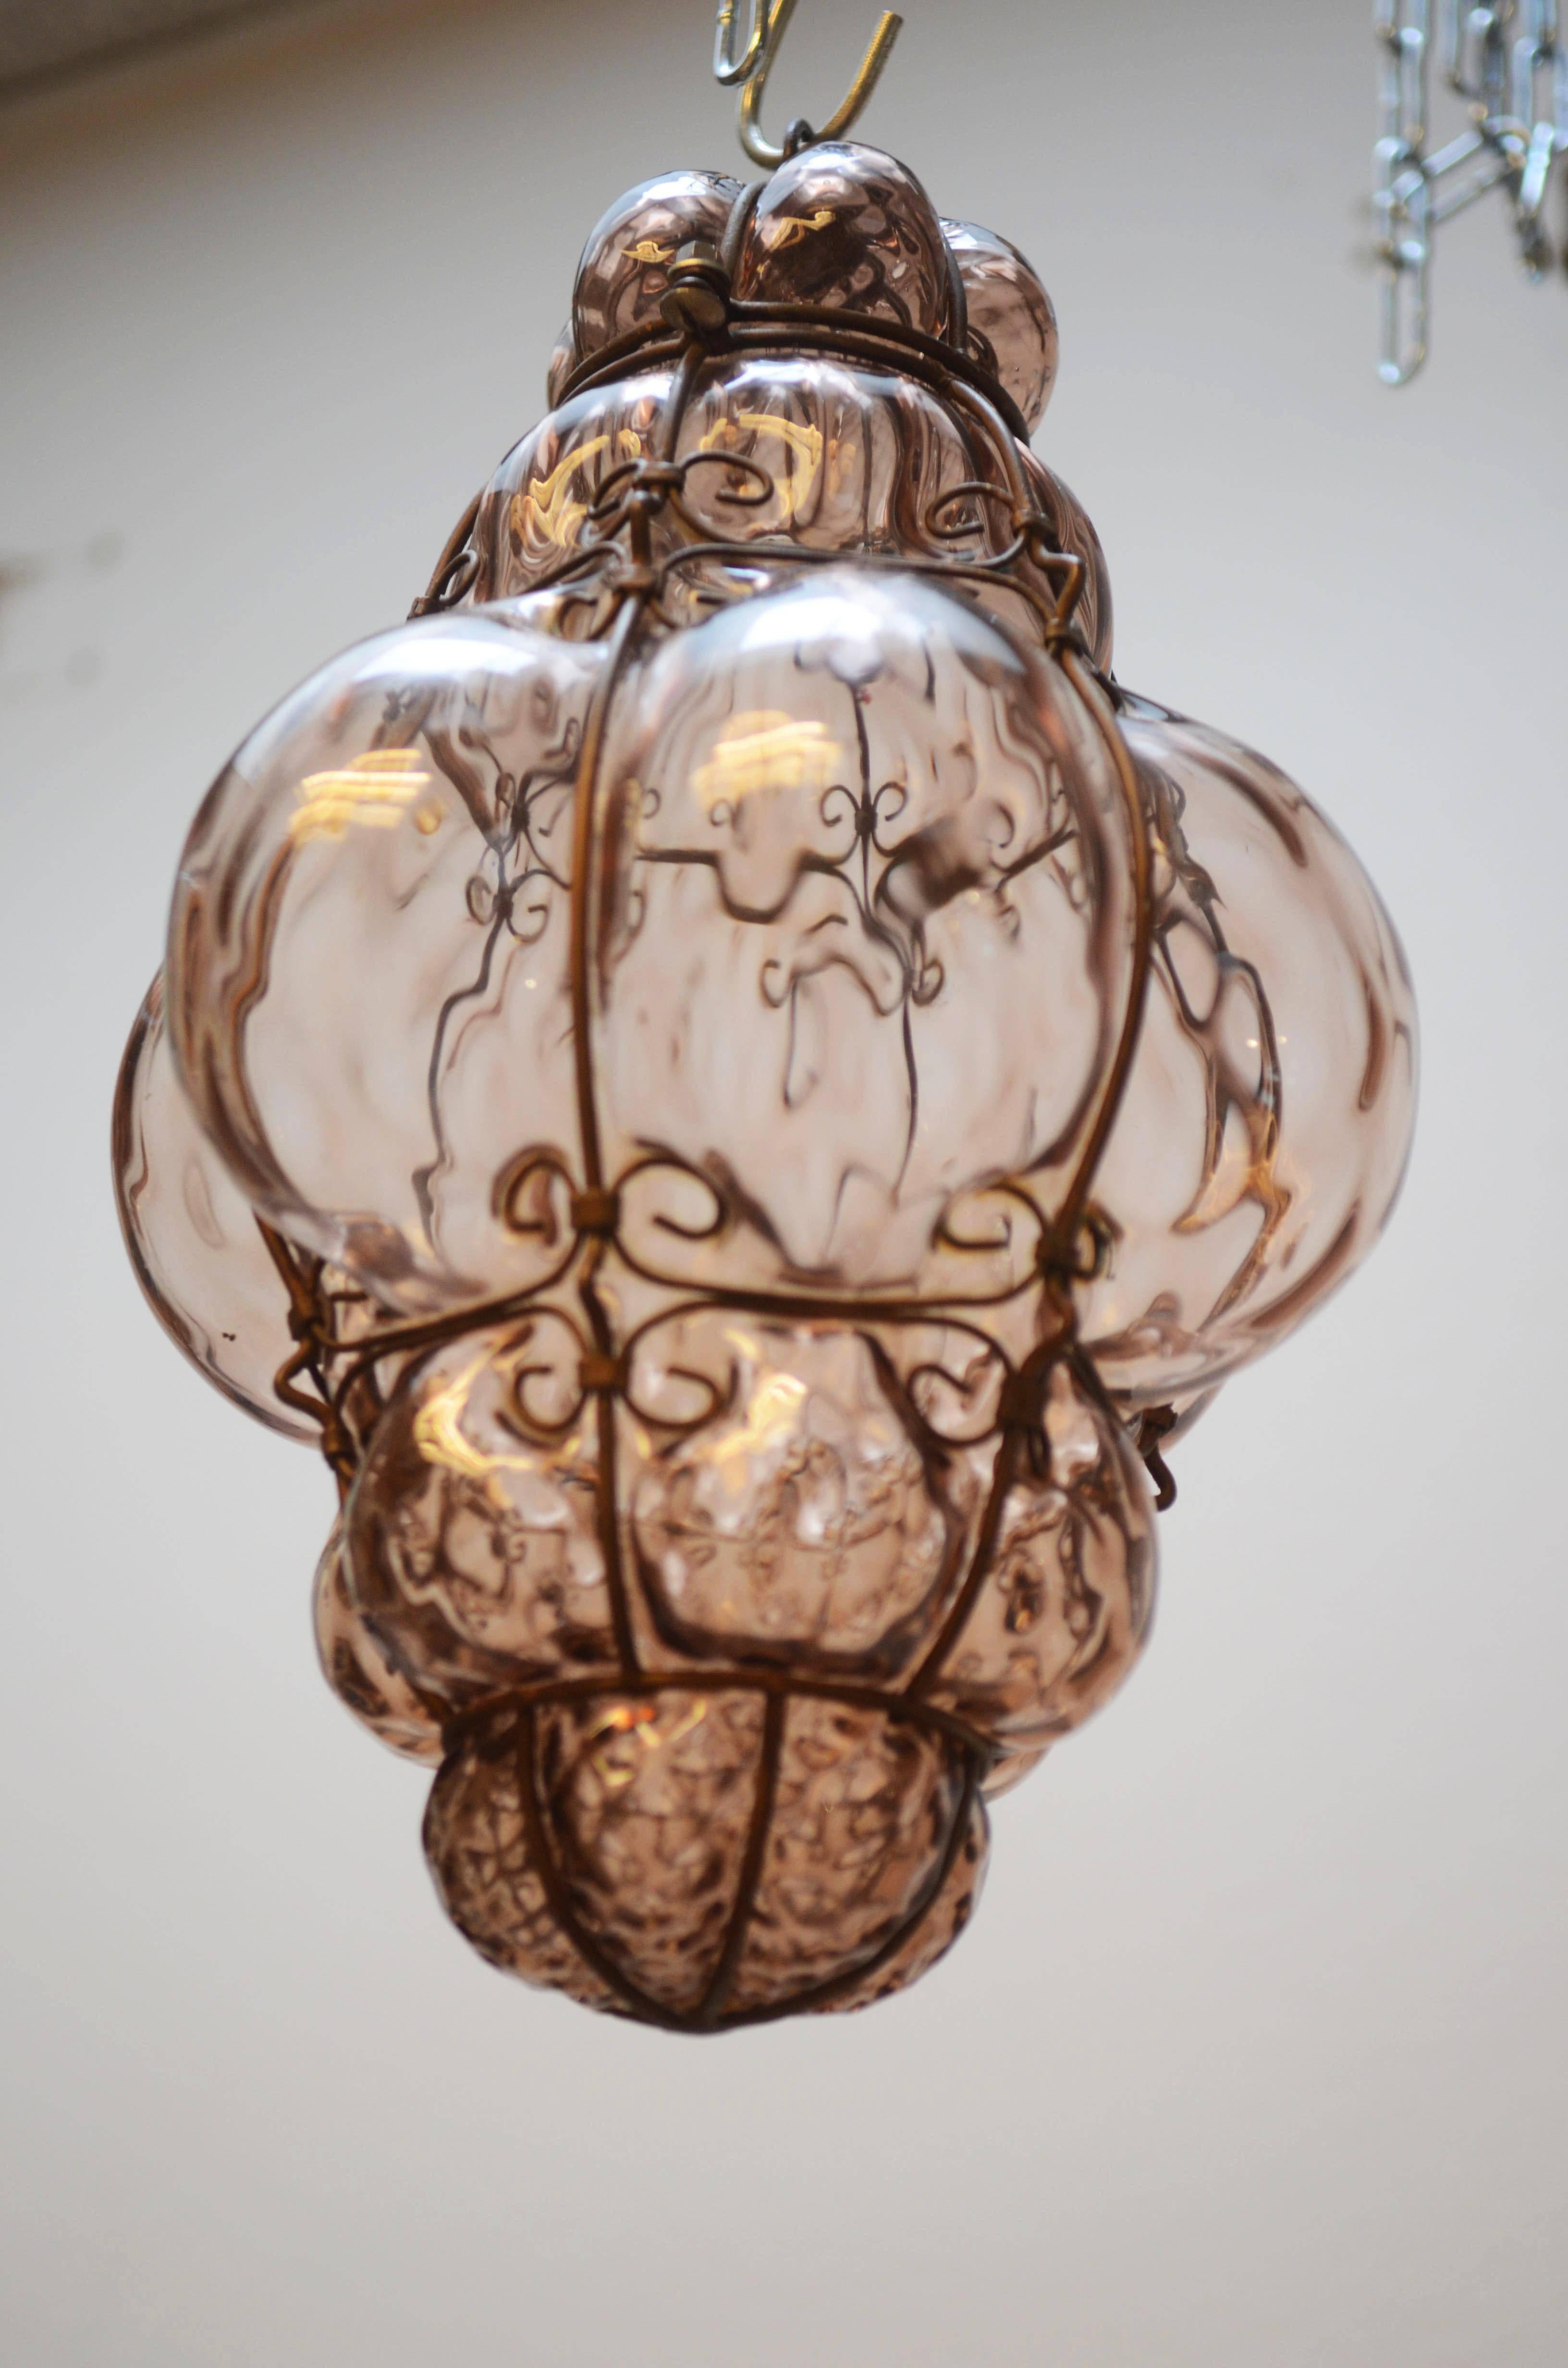 Beautiful Italian Murano glass bubble pendant manufactured by Seguso in the 1960s. It is made from handblown antique rose colored glass with a bronze colored steel cage.
Measurements: height 13.1/2